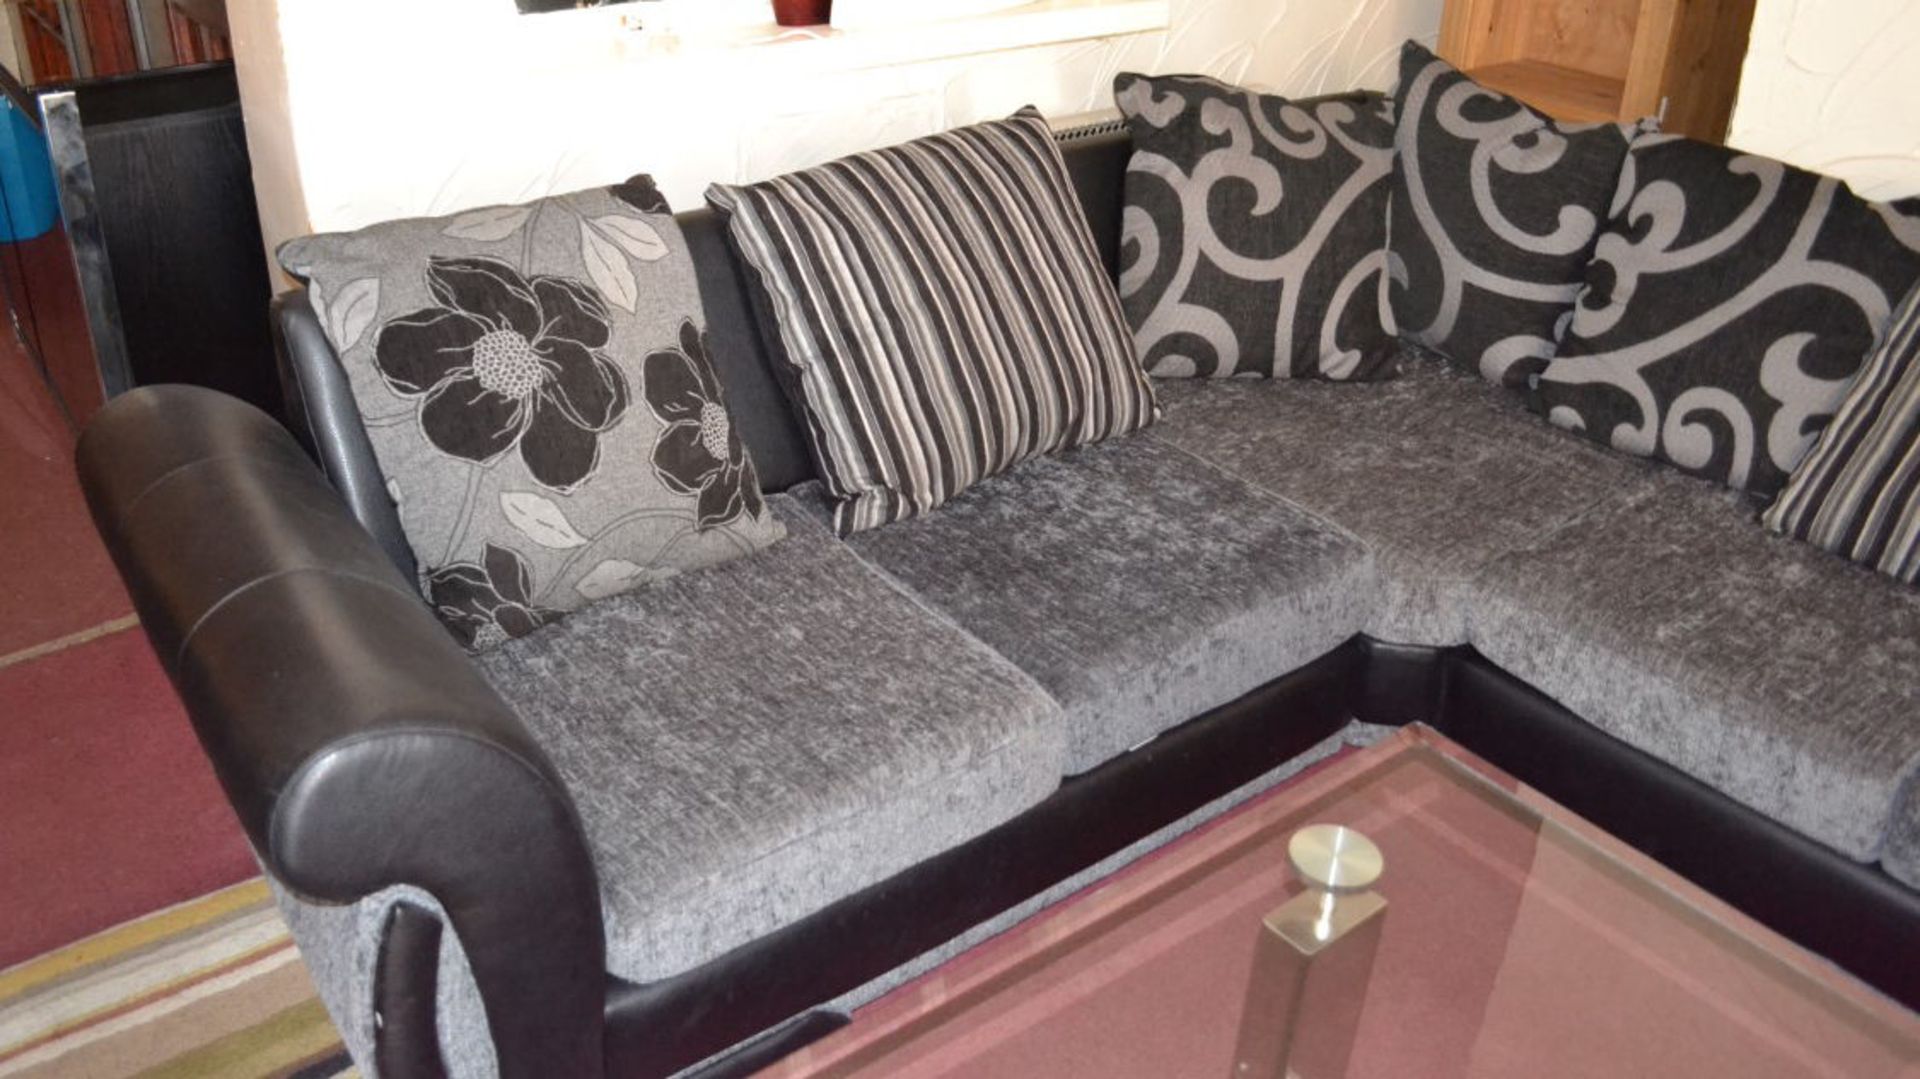 1 x Large Contemporary Leather & Fabric Corner Sofa In Grey & Black - Image 3 of 4